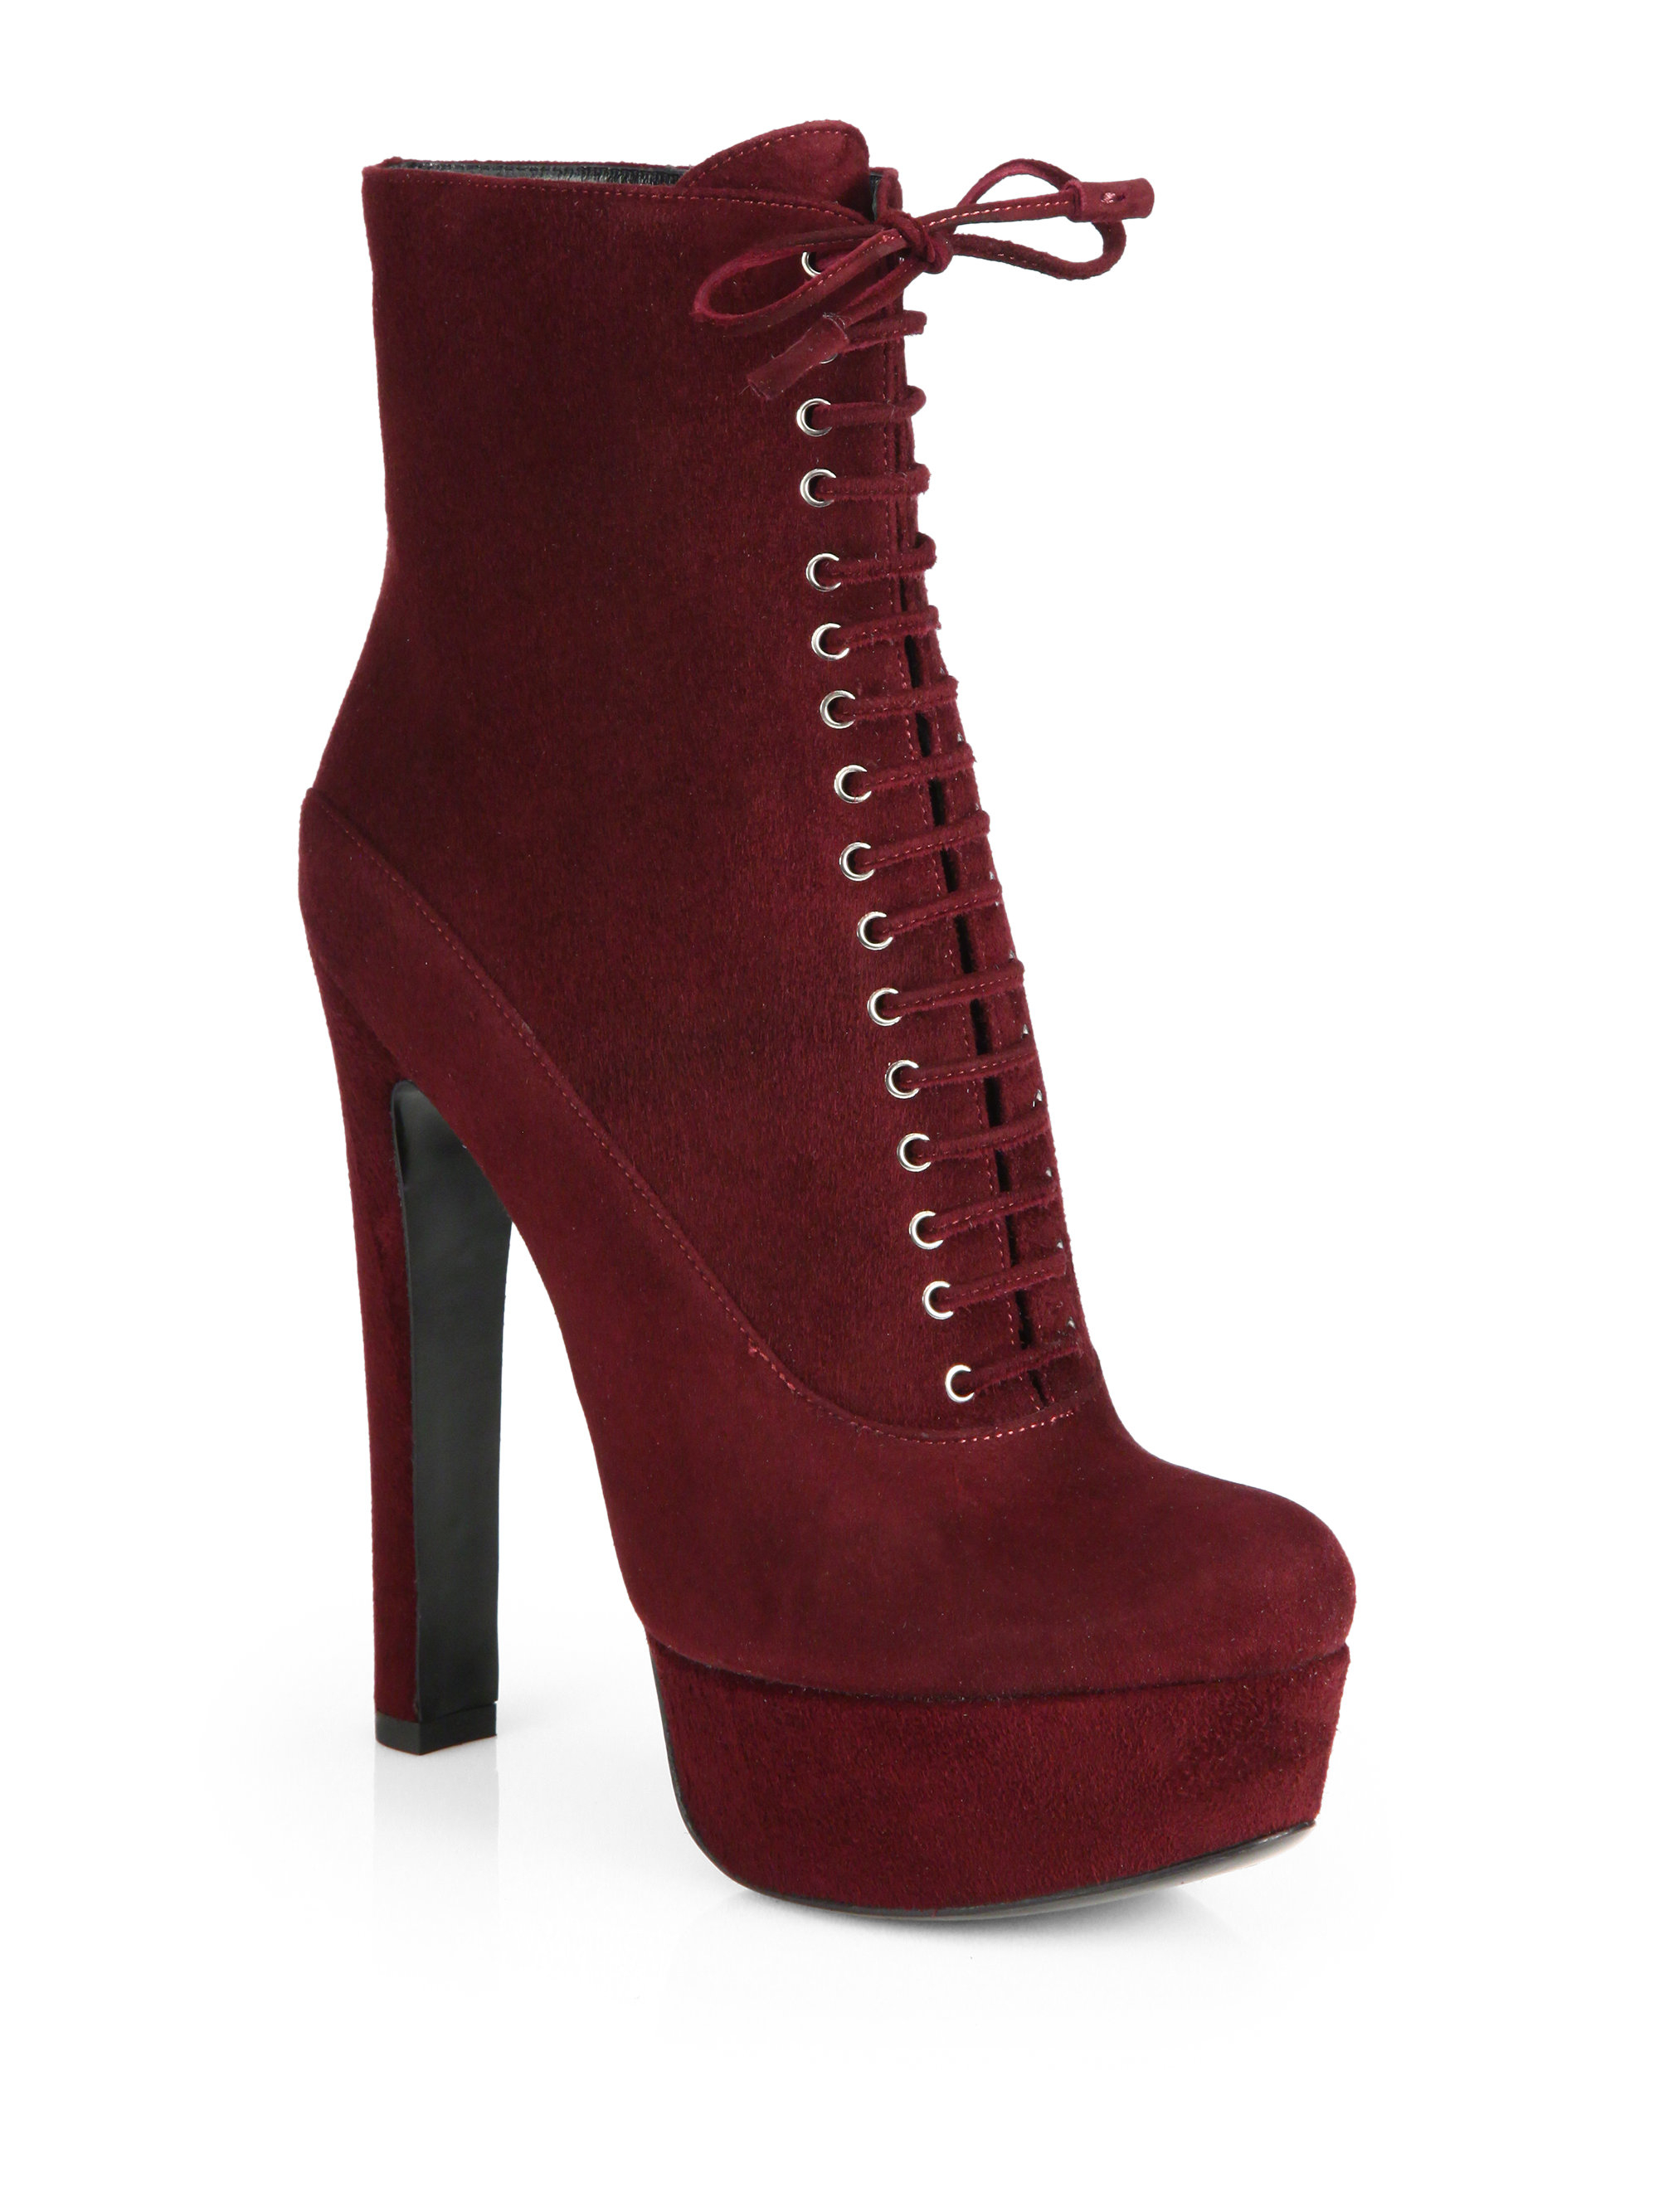 Lyst - Prada Suede Lace-Up Ankle Boots in Red